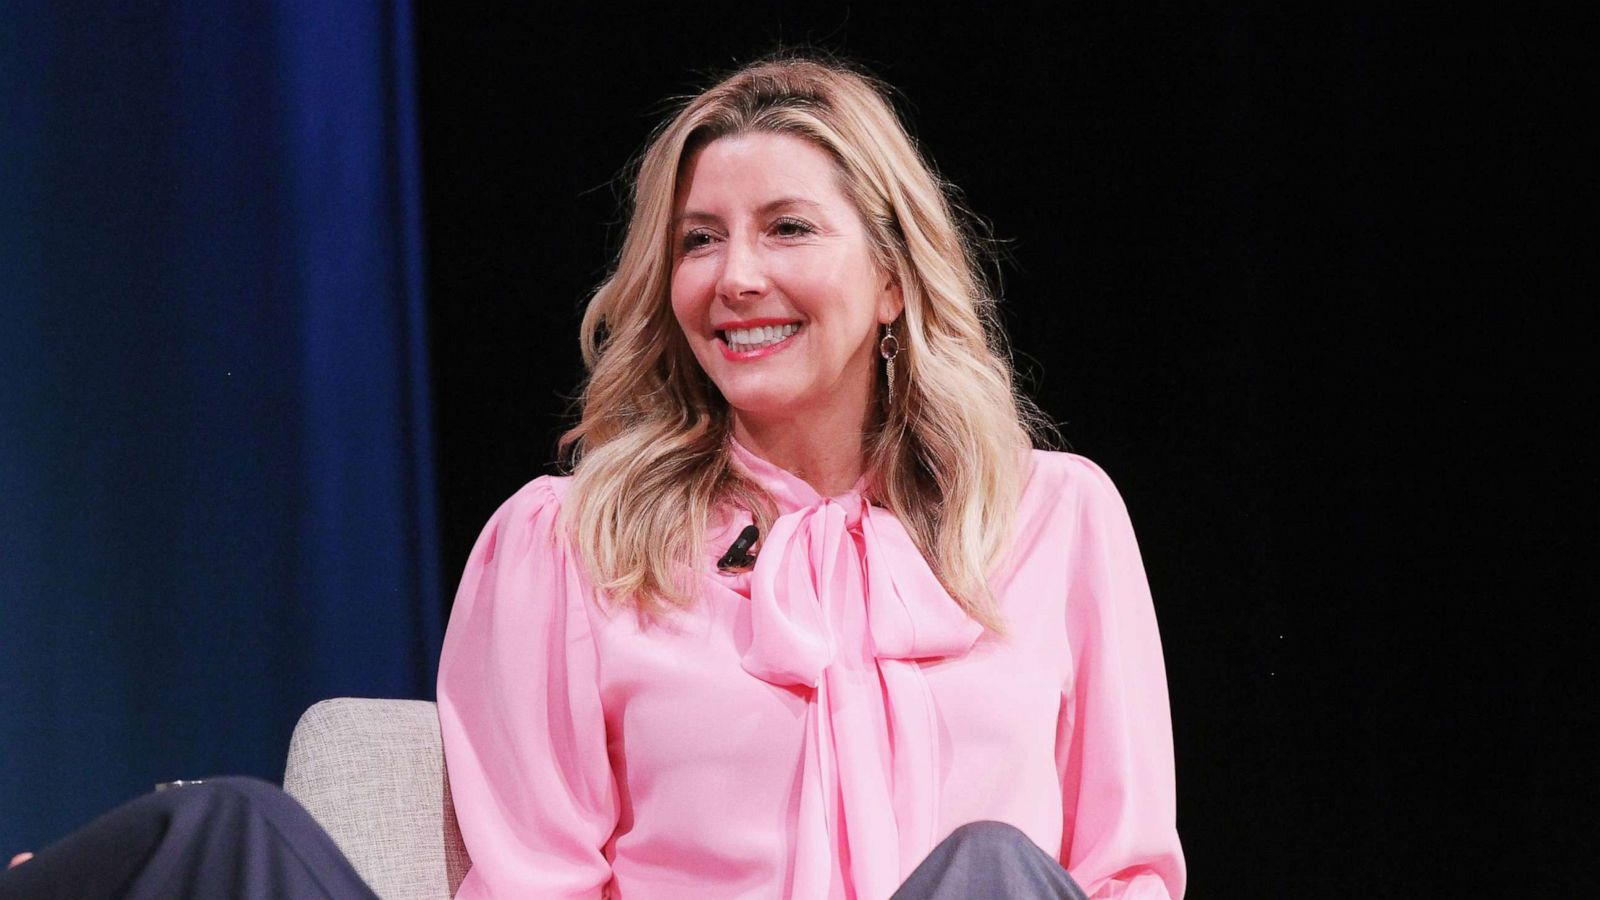 Sara Blakely, Spanx Founder, Is The World's Youngest Self-Made